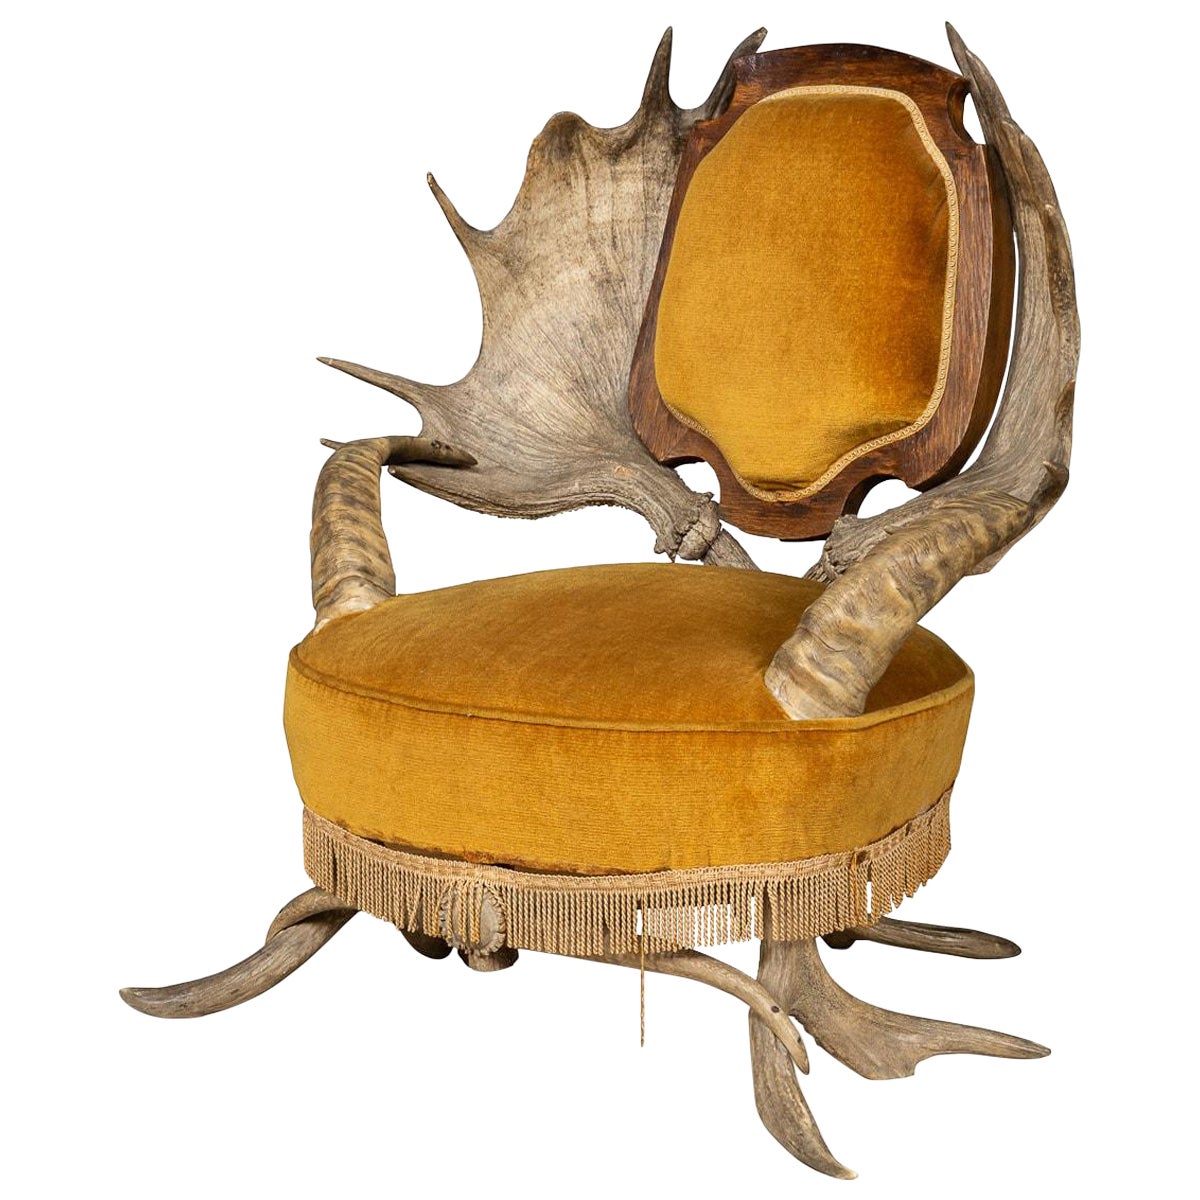 19th Century Swiss-German Black Forest Antler Horn Throne Chair For Sale